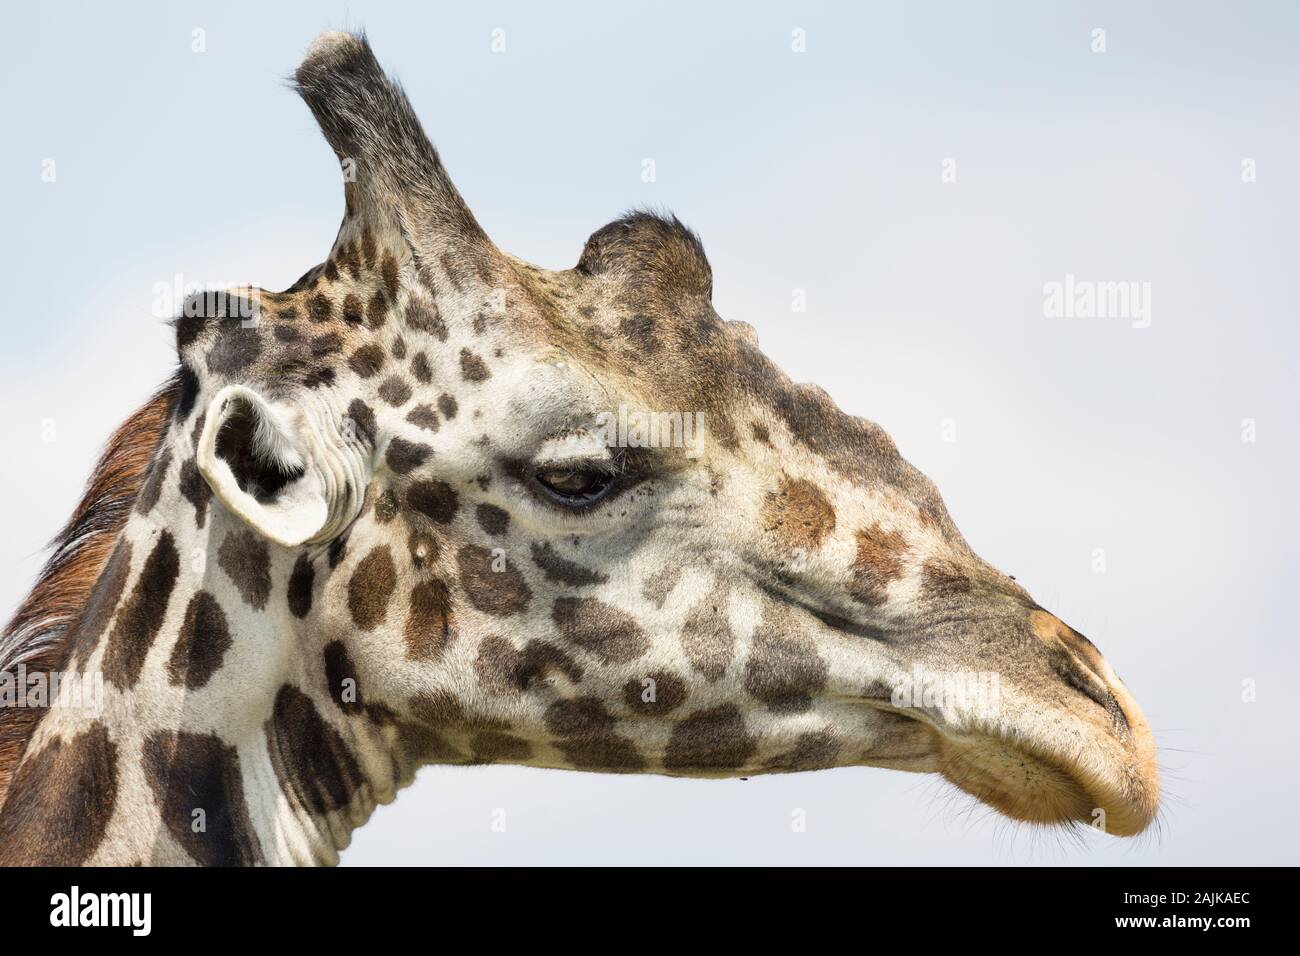 Close up view of the head of a male giraffe in profile Stock Photo